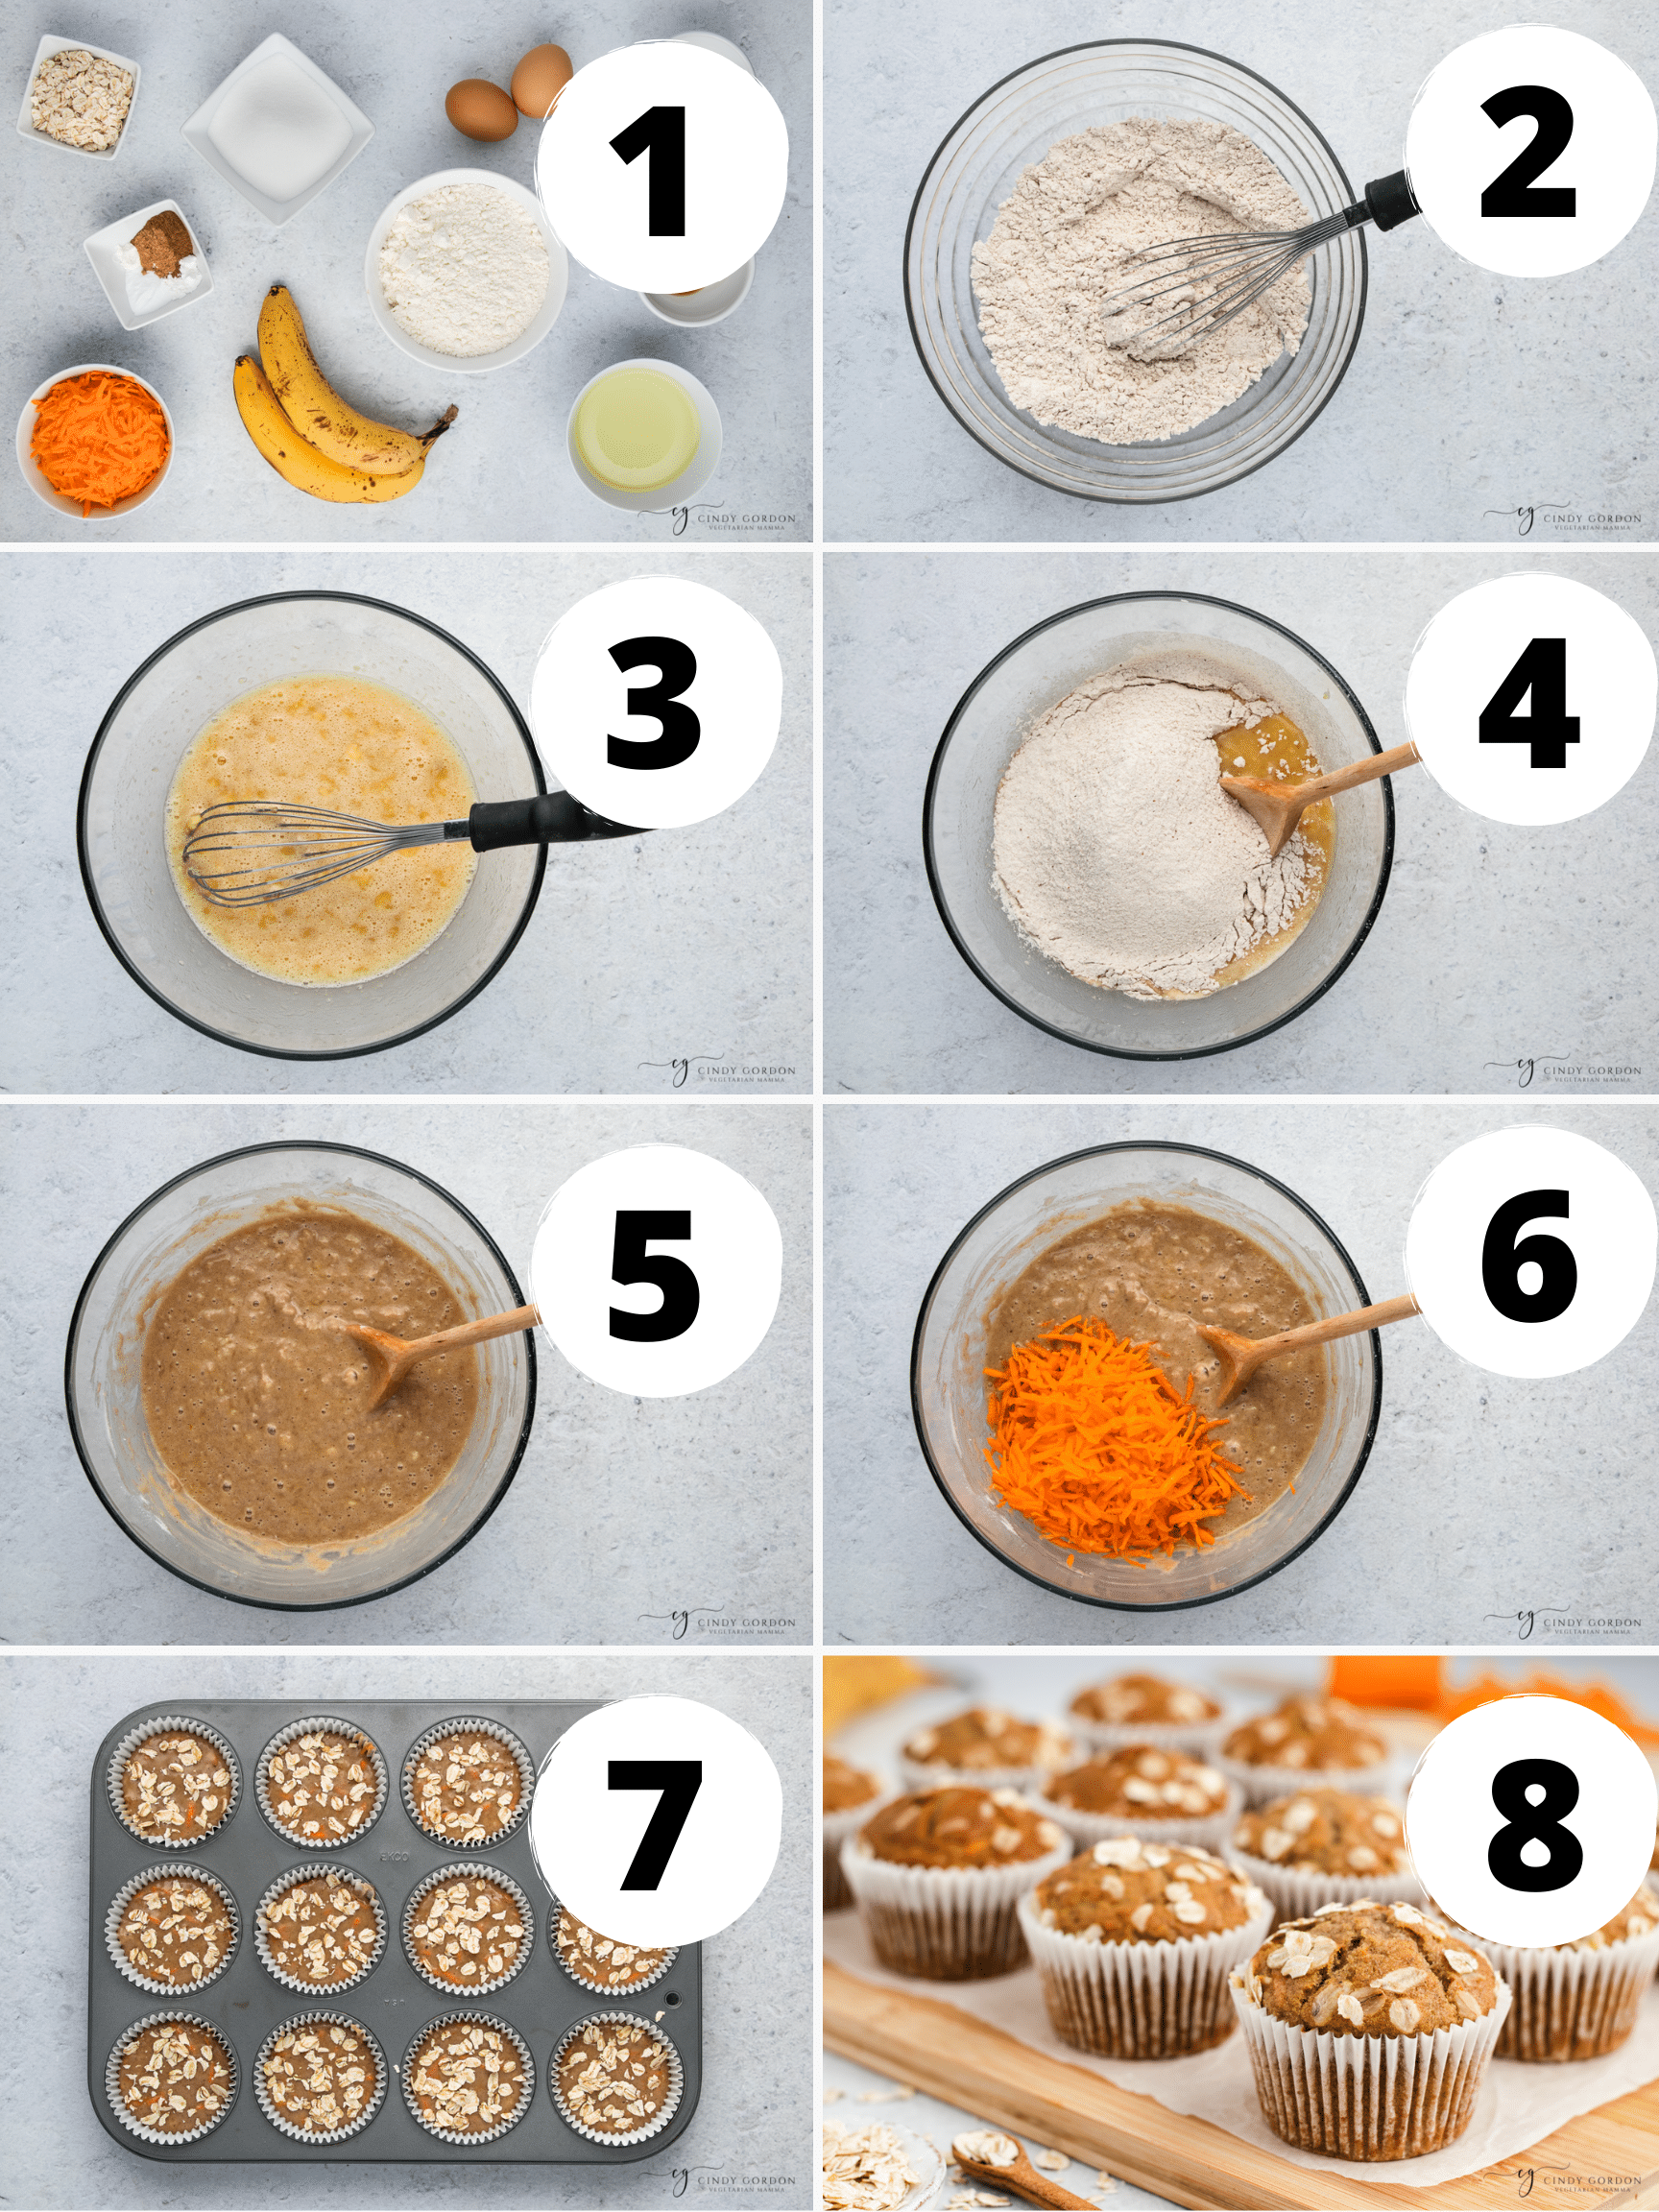 9 picture collage of step by step directions for making banana carrot muffins.